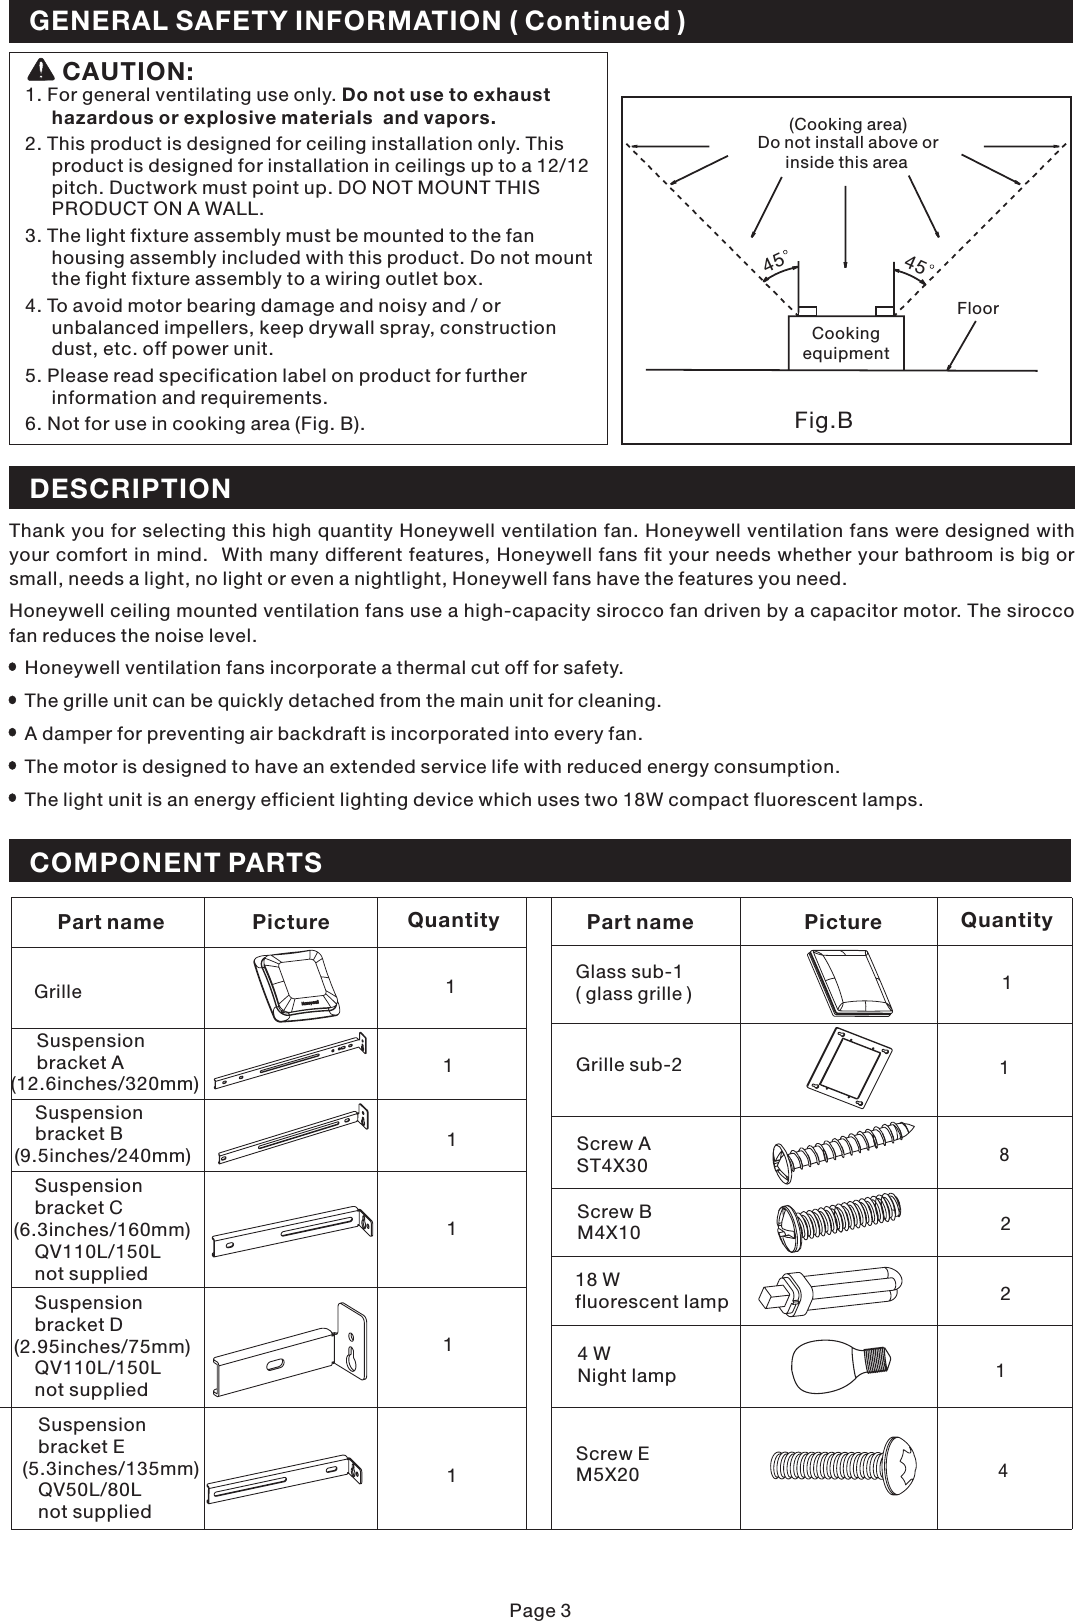 1. For general ventilating use only.2. This product is designed for ceiling installation only. Thisproduct is designed for installation in ceilings up to a 12/12pitch. Ductwork must point up. DO NOT MOUNT THISPRODUCT ON A WALL.3. The light fixture assembly must be mounted to the fanhousing assembly included with this product. Do not mountthe fight fixture assembly to a wiring outlet box.4. To avoid motor bearing damage and noisy and / orunbalanced impellers, keep drywall spray, constructiondust, etc. off power unit.5. Please read specification label on product for furtherinformation and requirements.6. Not for use in cooking area (Fig. B).Do not use to exhausthazardous or explosive materials  and vapors.CAUTION:Fig.B(Cooking area)Do not install above orinside this areaCookingequipmentFloor4545Page 3DESCRIPTIONThank you for selecting this high quantity Honeywell ventilation fan. Honeywell ventilation fans were designed withyour comfort in mind. With many different features, Honeywell fans fit your needs whether your bathroom is big orsmall, needs a light, no light or even a nightlight, Honeywell fans have the features you need.Honeywell ceiling mounted ventilation fans use a high-capacity sirocco fan driven by a capacitor motor. The siroccofan reduces the noise level.Honeywell ventilation fans incorporate a thermal cut off for safety.The grille unit can be quickly detached from the main unit for cleaning.A damper for preventing air backdraft is incorporated into every fan.The light unit is an energy efficient lighting device which uses two 18W compact fluorescent lamps.The motor is designed to have an extended service life with reduced energy consumption.GENERAL SAFETY INFORMATION ( Continued )COMPONENT PARTS18 Wfluorescent lamp2Part namePicturePart namePictureQuantity QuantityGrille 1821Suspensionbracket A(12.6inches/320mm)Suspensionbracket B(9.5inches/240mm)Suspensionbracket C(6.3inches/160mm)QV110L/150Lnot suppliedSuspensionbracket D(2.95inches/75mm)QV110L/150Lnot suppliedSuspensionbracket E(5.3inches/135mm)QV50L/80Lnot supplied1111Screw AST4X30Screw BM4X104 WNight lampGlass sub-1( glass grille )Screw EM5X20Grille sub-21411